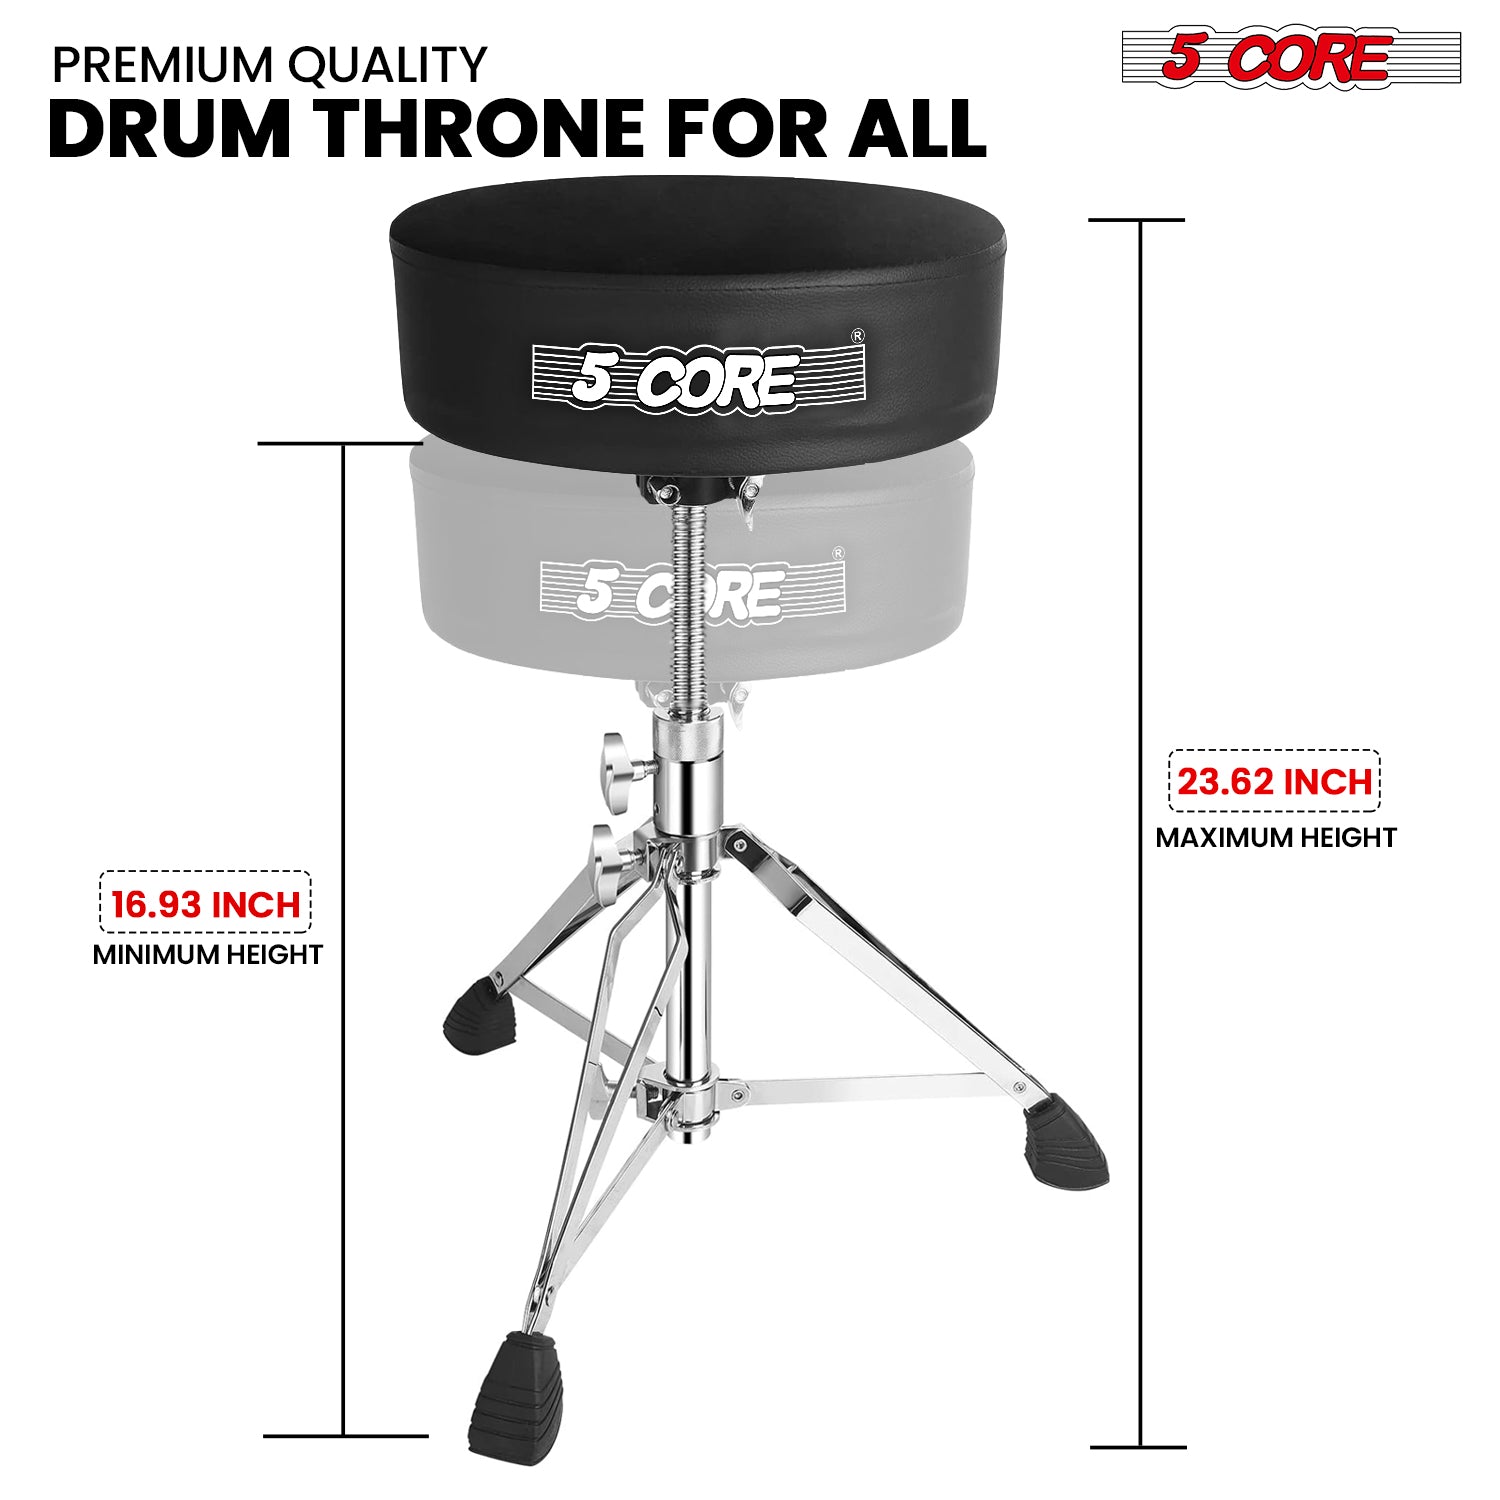 Ergonomic drum throne with thick padding and adjustable height for comfort